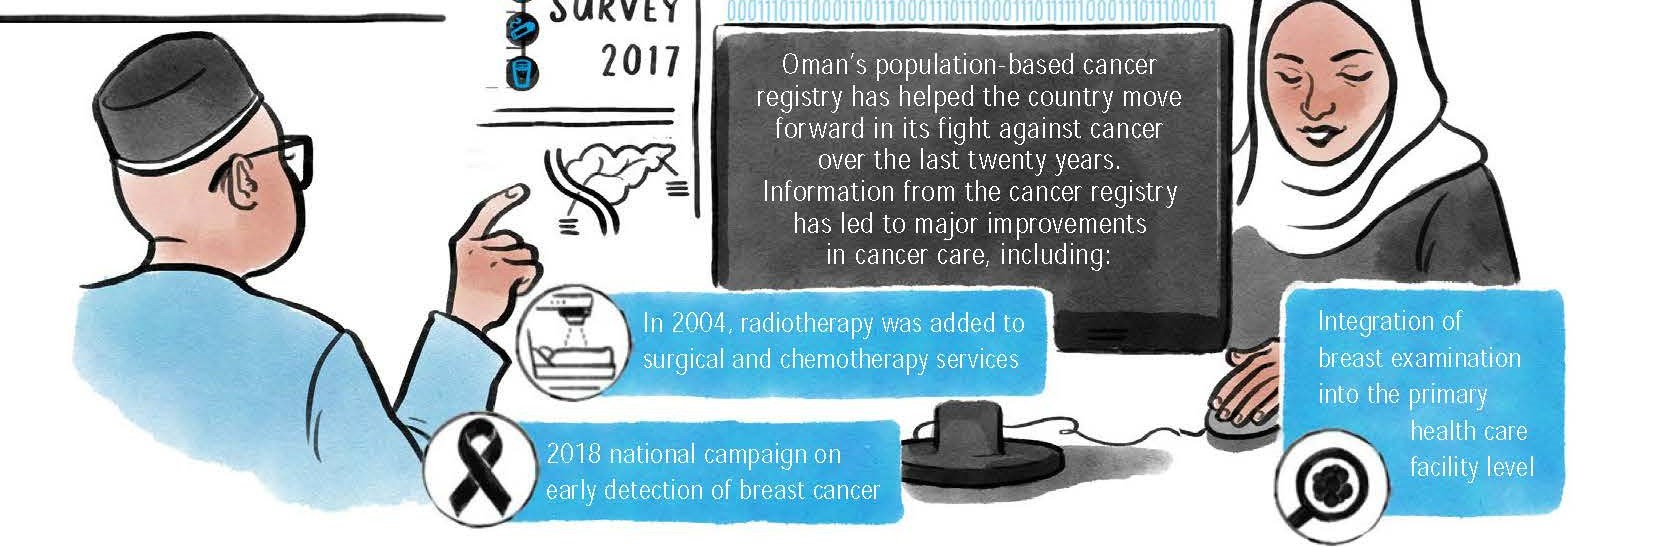 Reorienting healthcare services for people living with NCDs in Oman: Lessons from the COVID-19 pandemic